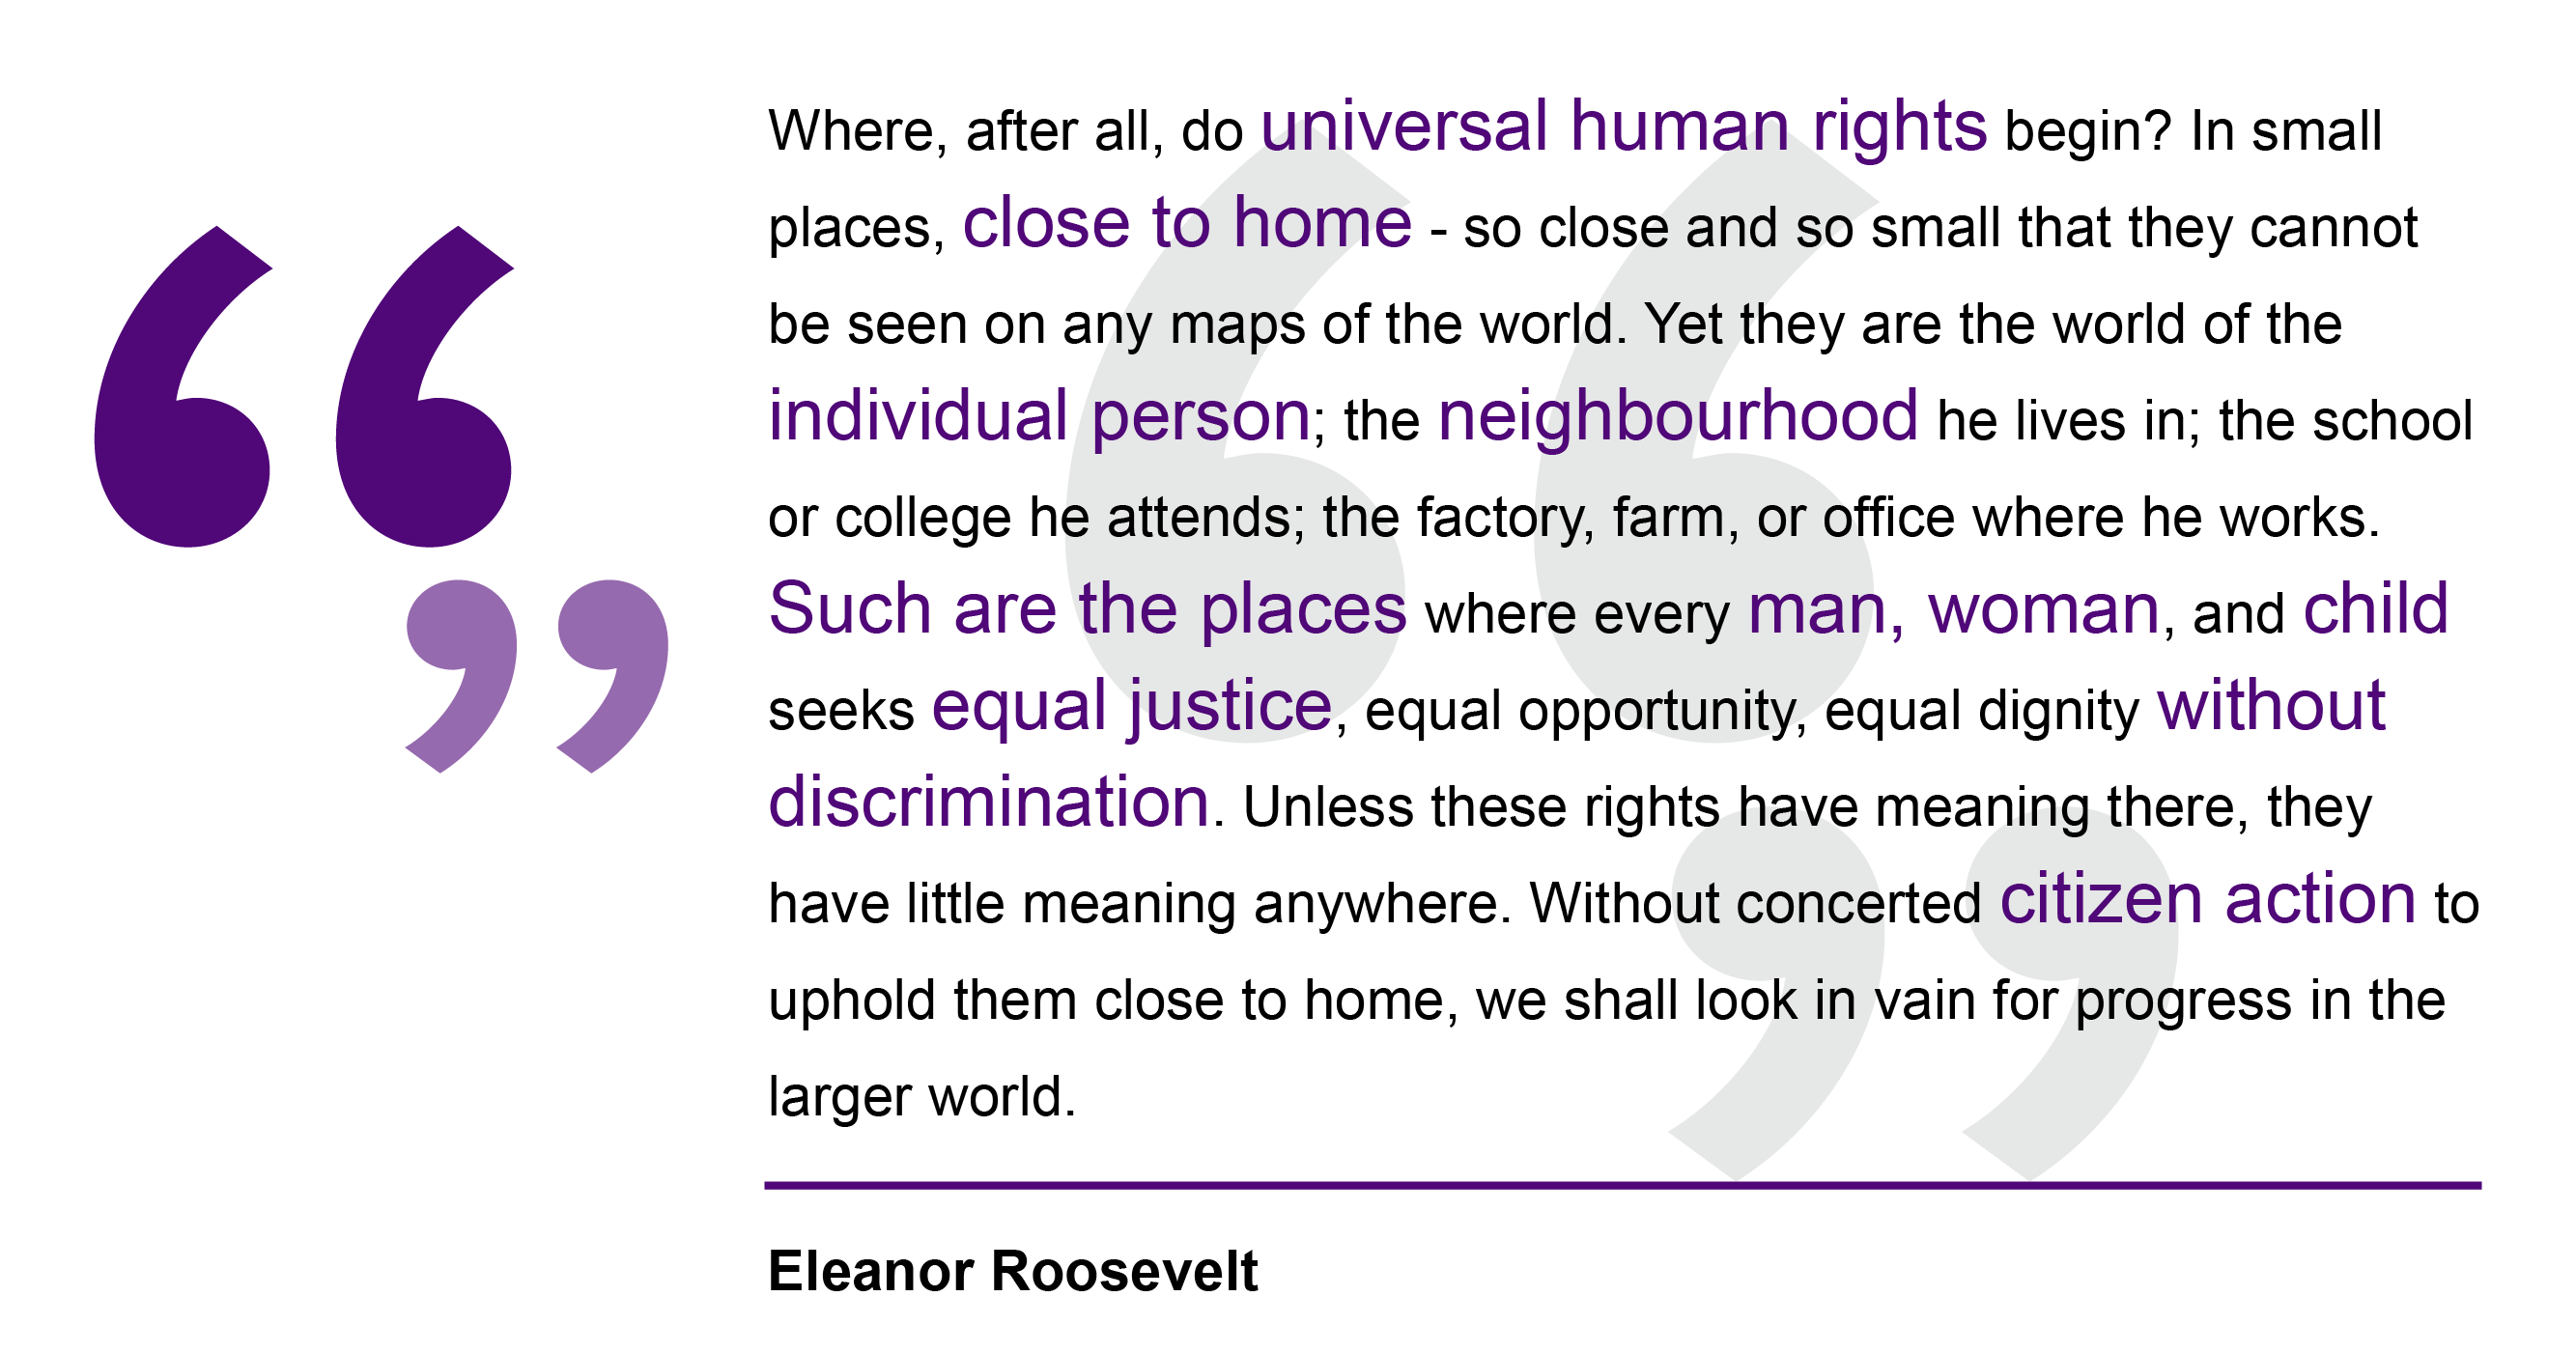 Eleanor Roosevelt, 1948 Where, after all, do universal human rights begin? In small places, close to home - so close and so small that they cannot be seen on any maps of the world. Yet they are the world of the individual person; the neighbourhood he lives in; the school or college he attends; the factory, farm, or office where he works. Such are the places where every man, woman, and child seeks equal justice, equal opportunity, equal dignity without discrimination. Unless these rights have meaning there, they have little meaning anywhere. Without concerted citizen action to uphold them close to home, we shall look in vain for progress in the larger world.Eleanor Roosevelt, speech to the United Nations, 1948